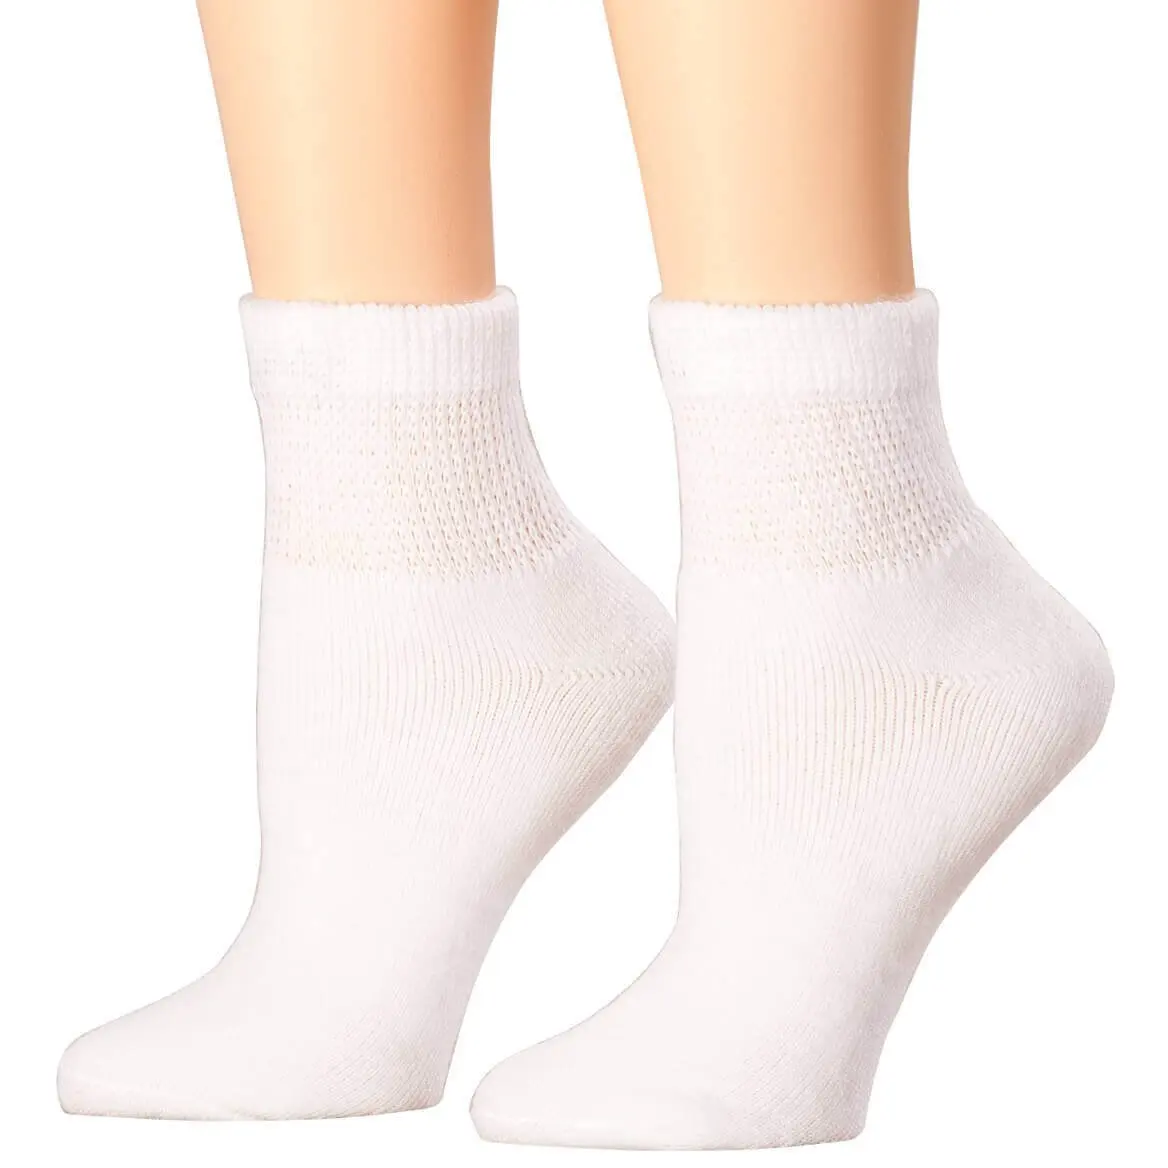 Incredisocks Warm Diabetic Compression Socks for Hiking-L-Red